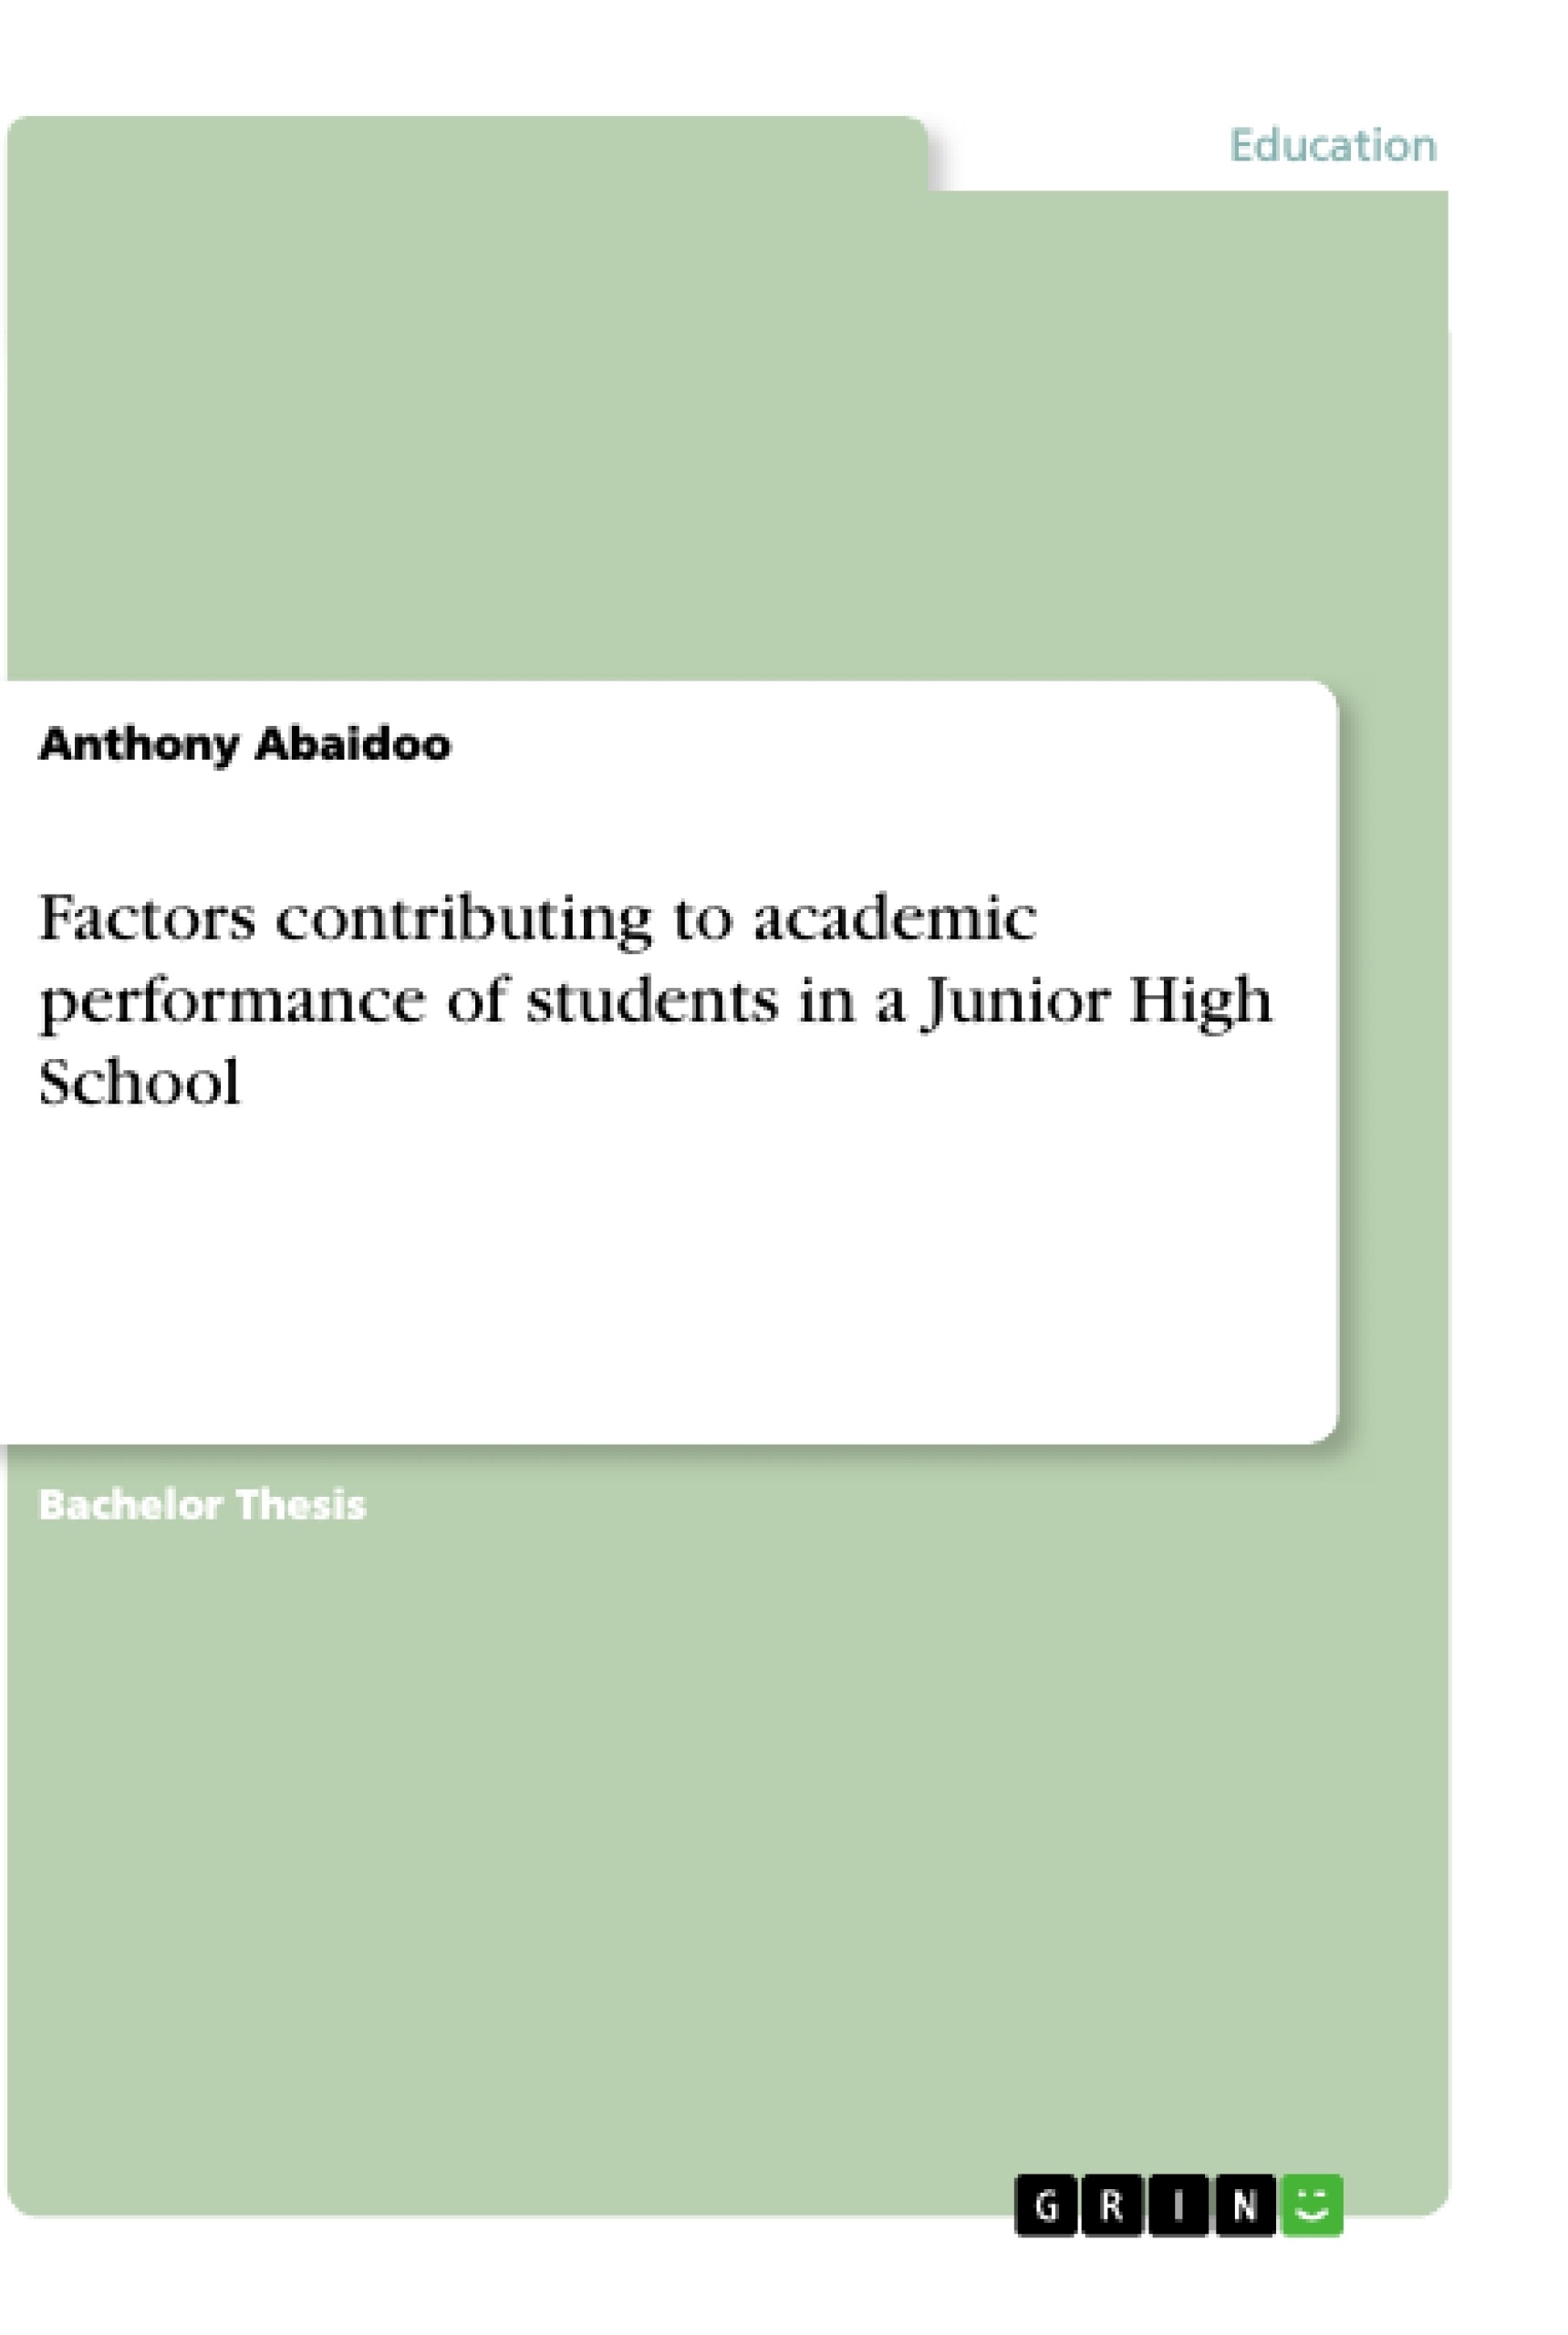 Título: Factors contributing to academic performance of students in a Junior High School